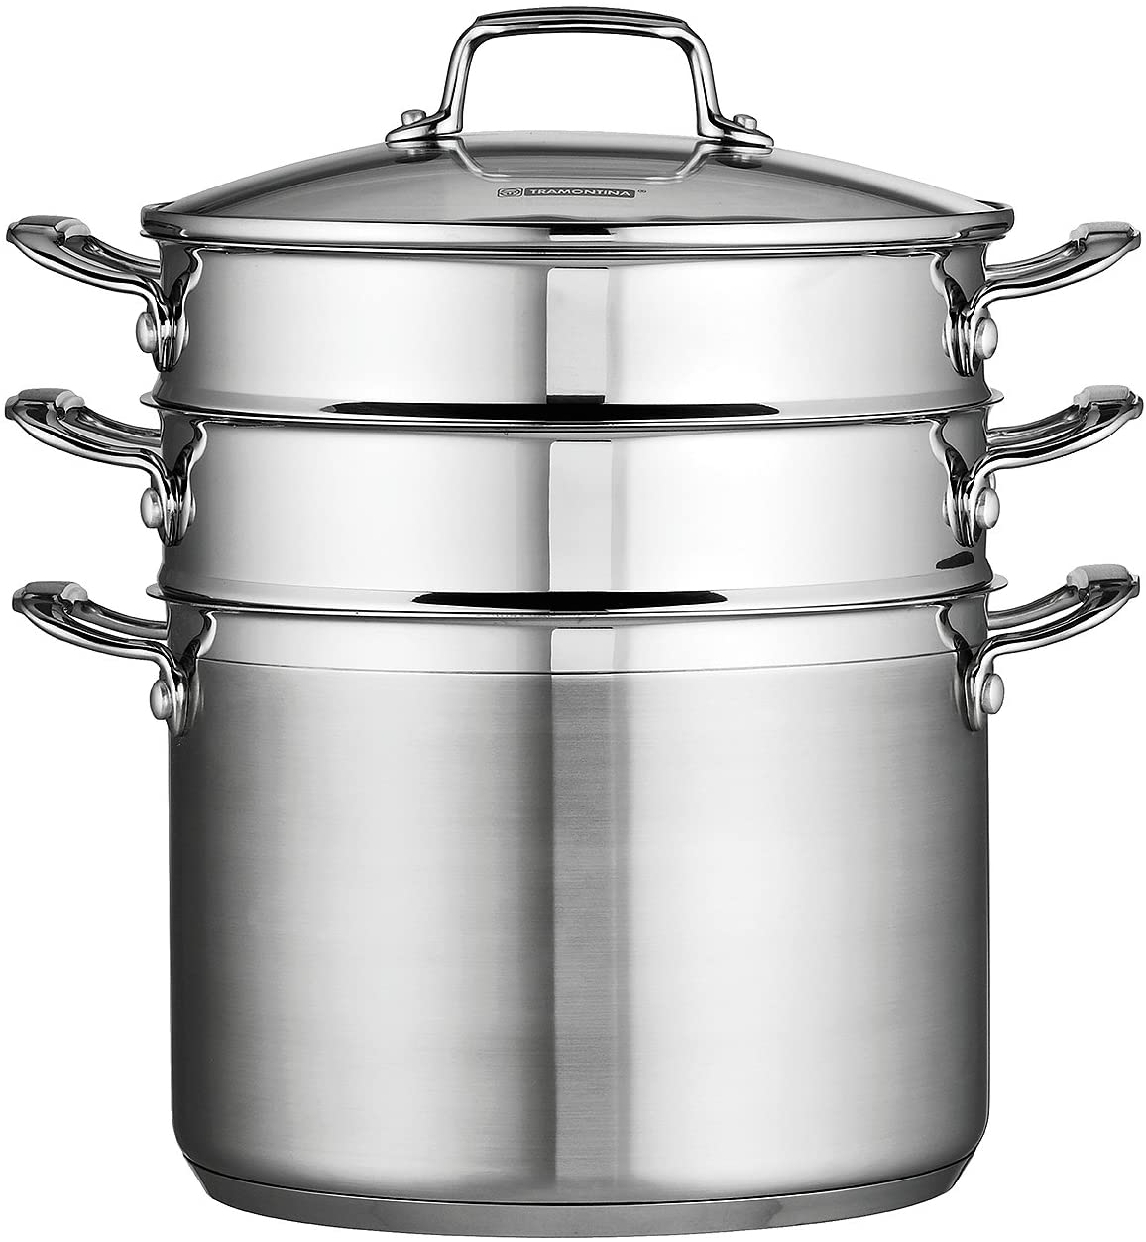 Tramontina(トラモンティア) Gourmet Tri-ply Base Stainless Steel 4-Piece 8-Quart Multi-Cooker シルバーの商品画像サムネ3 